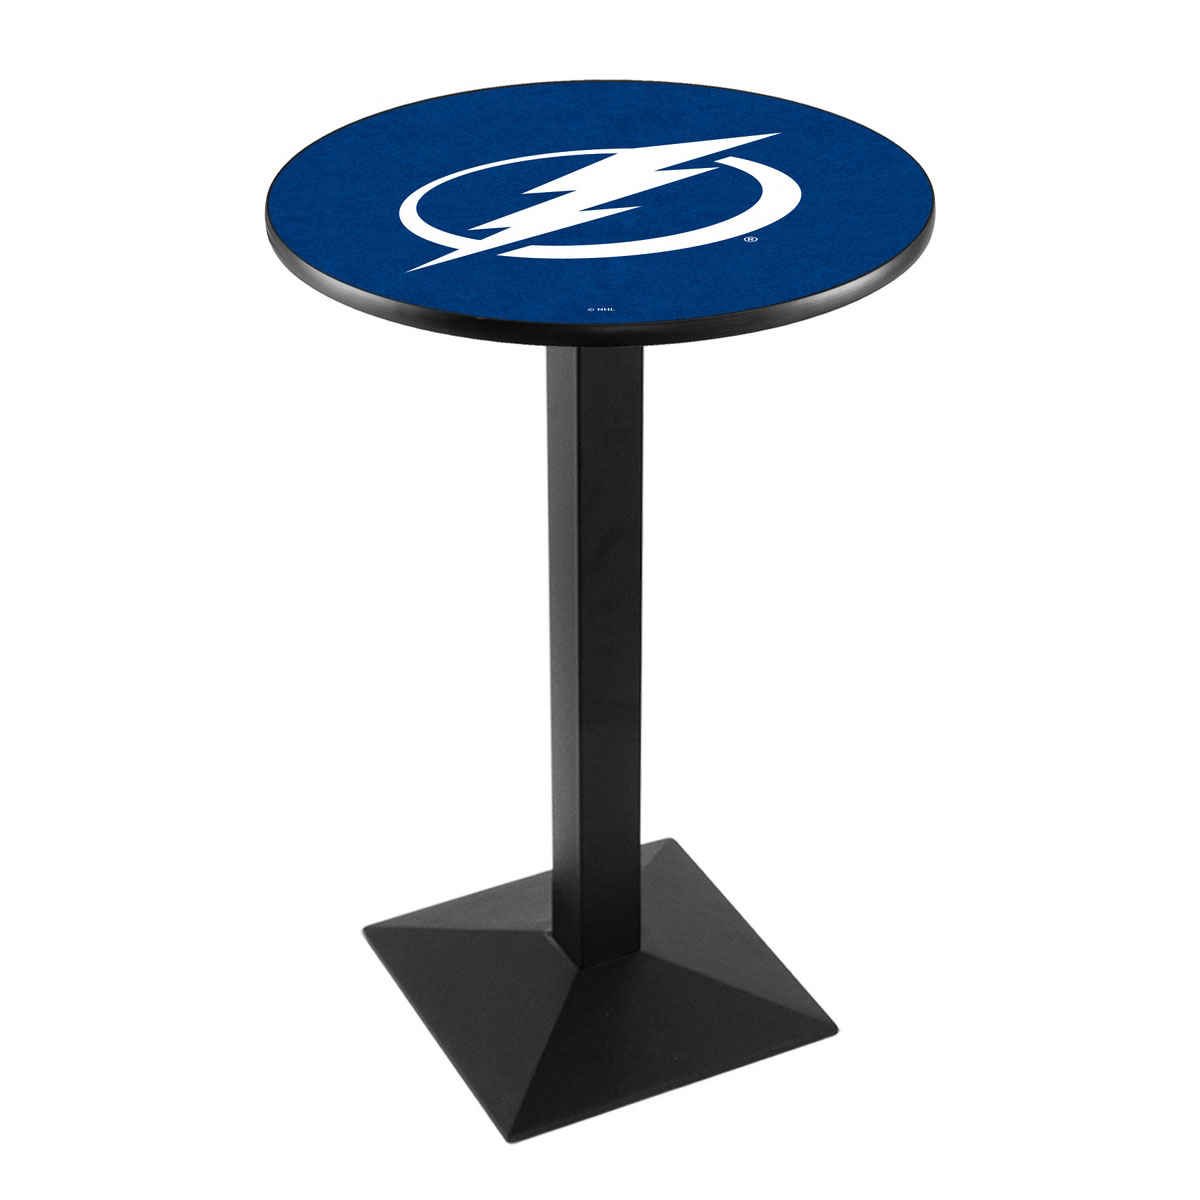 Tampa Bay Lightning Logo Pub Bar Table With Square Stand